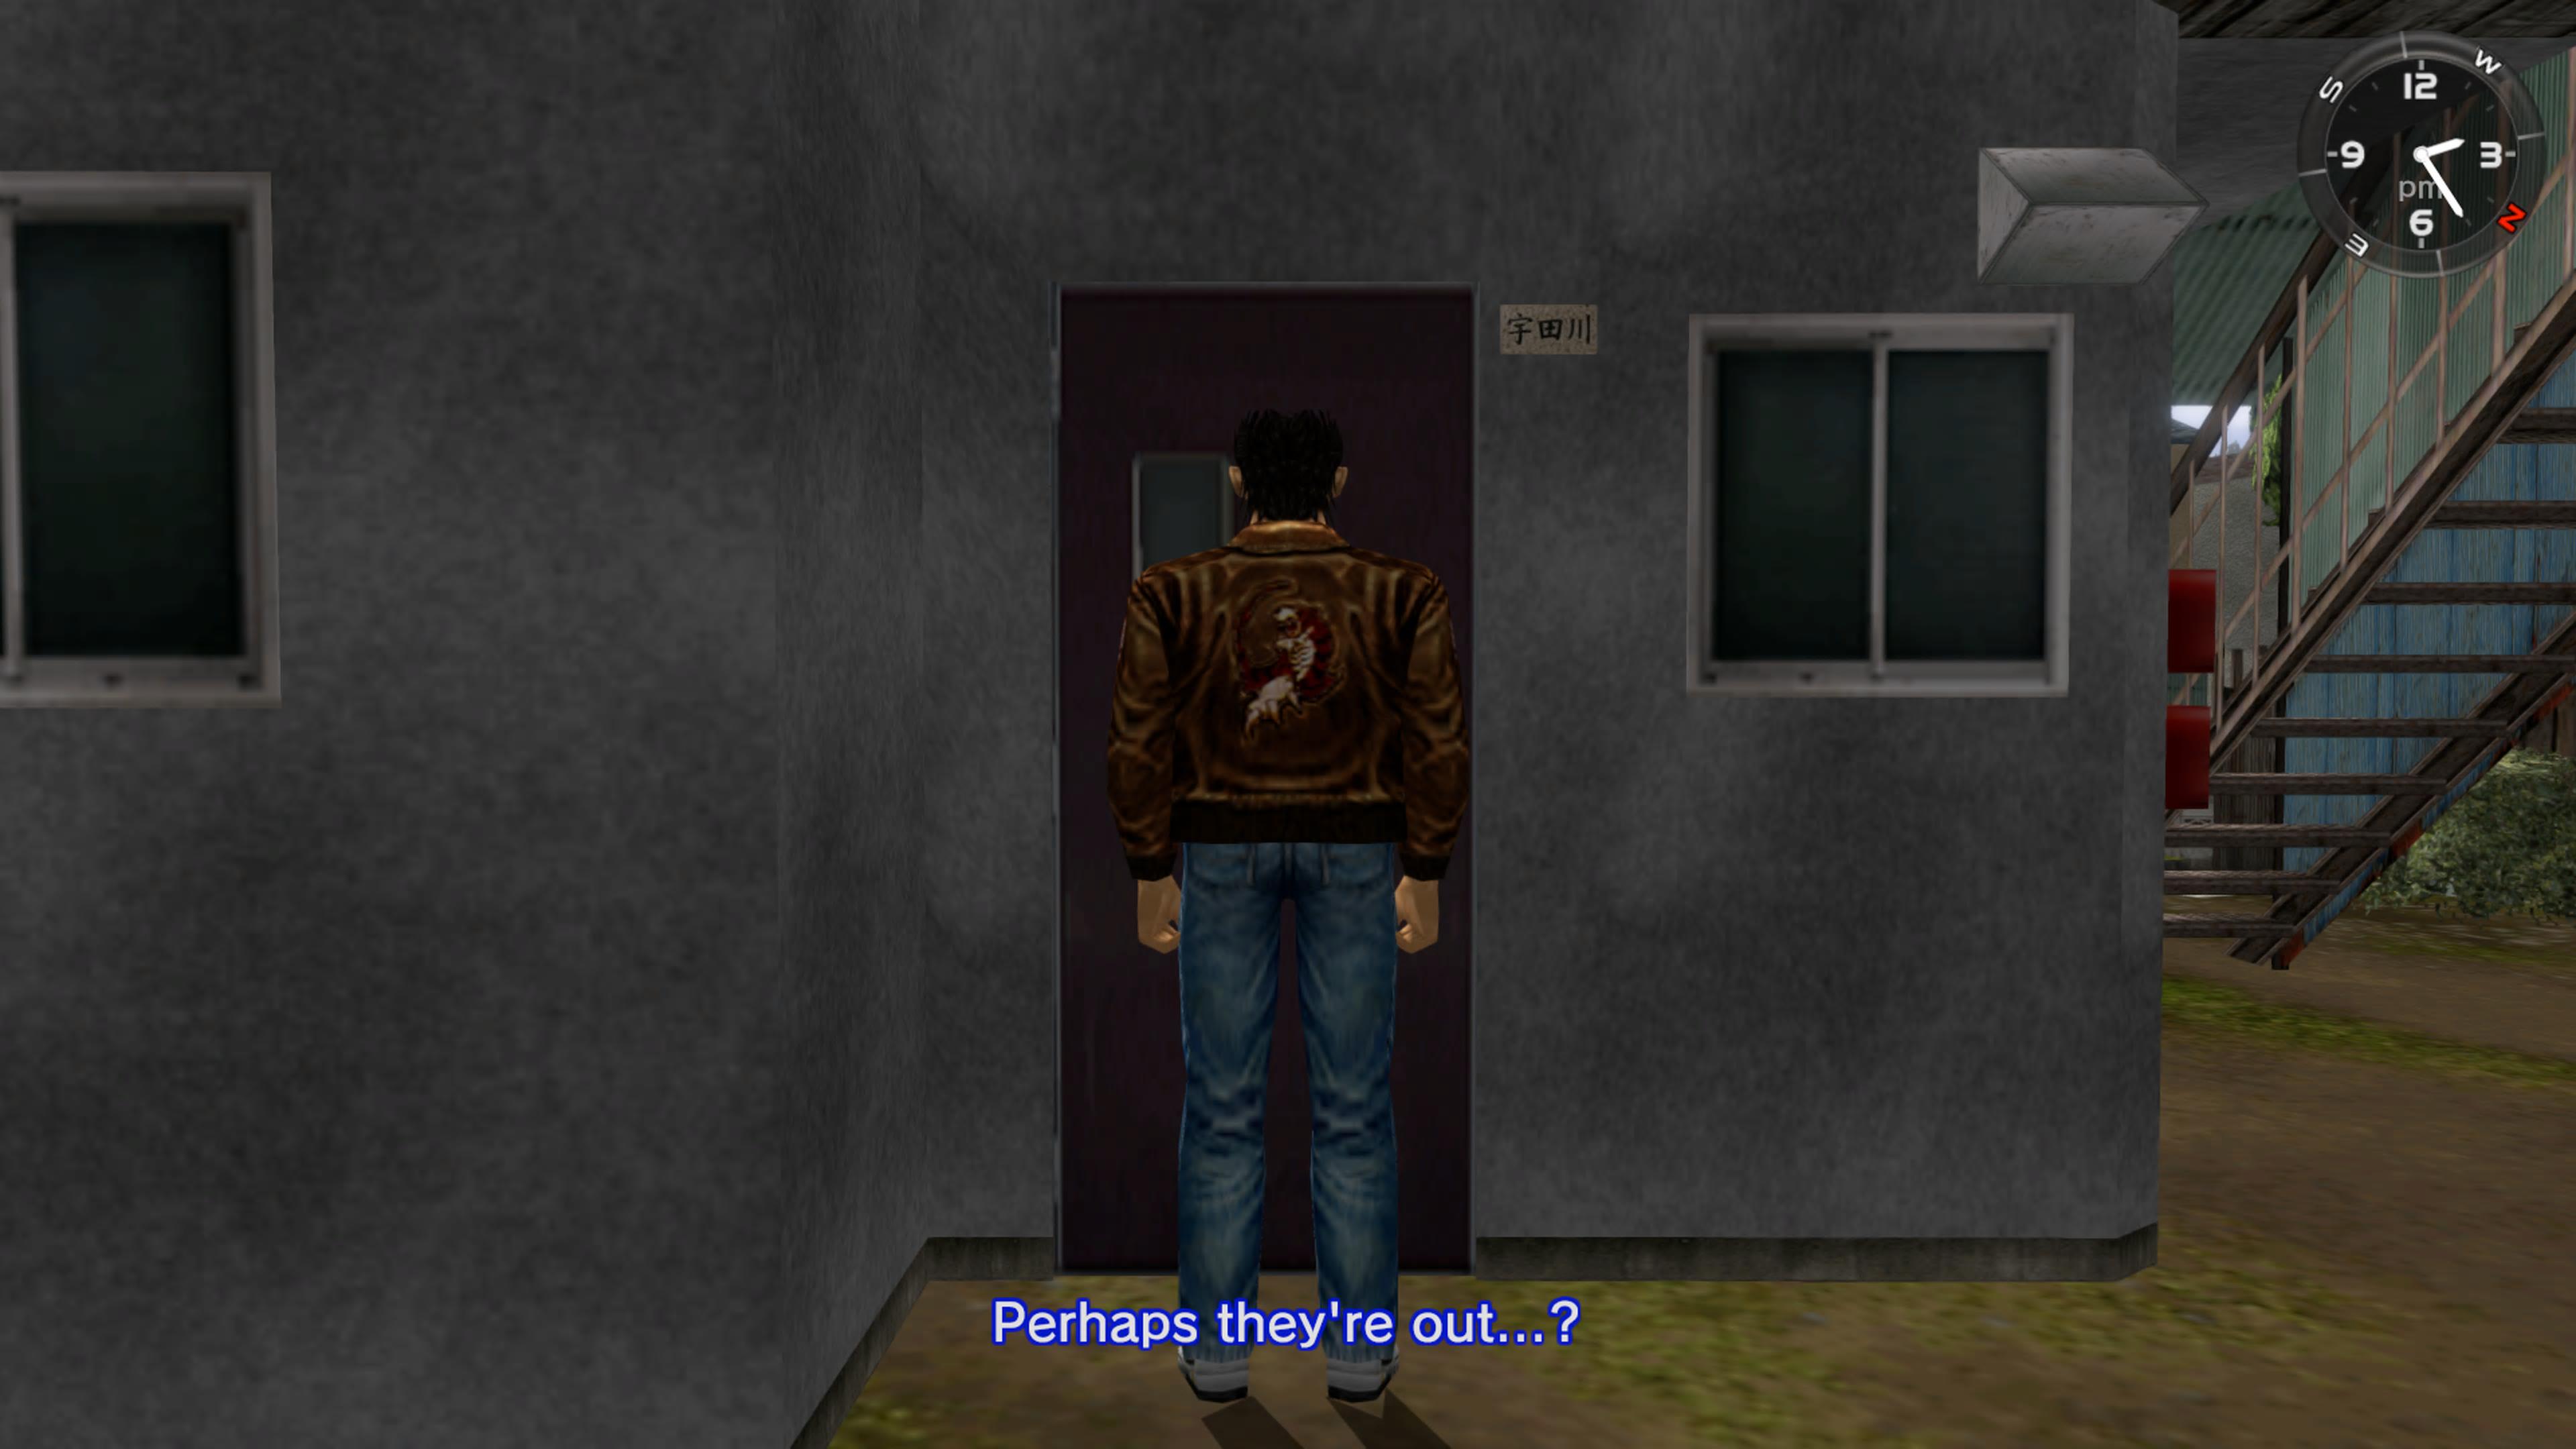 Ryo knocking on a door but no-one's home